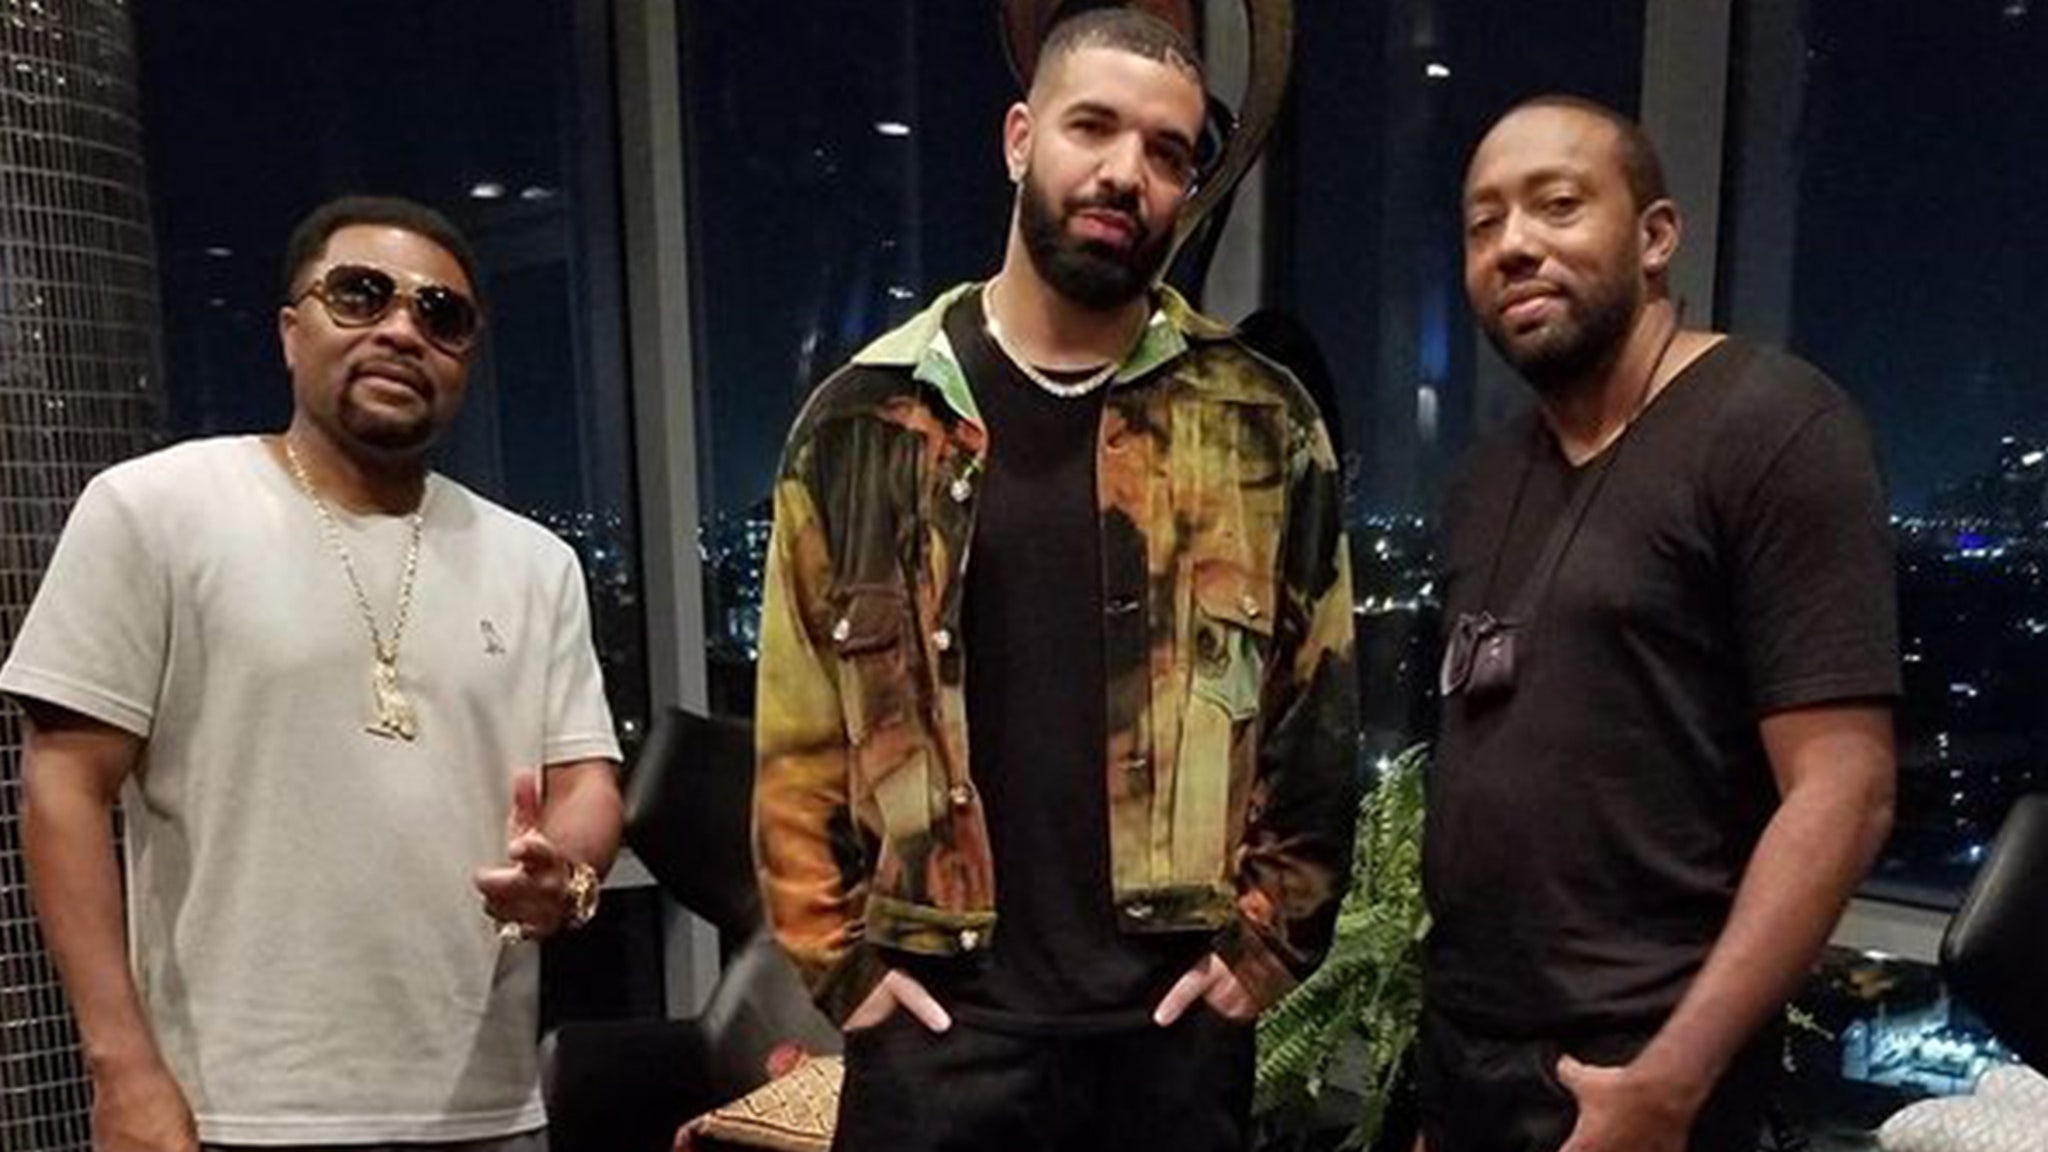 Drake, J. Prince and Larry Hoover Jr. Meeting Was Before Kanye's ...